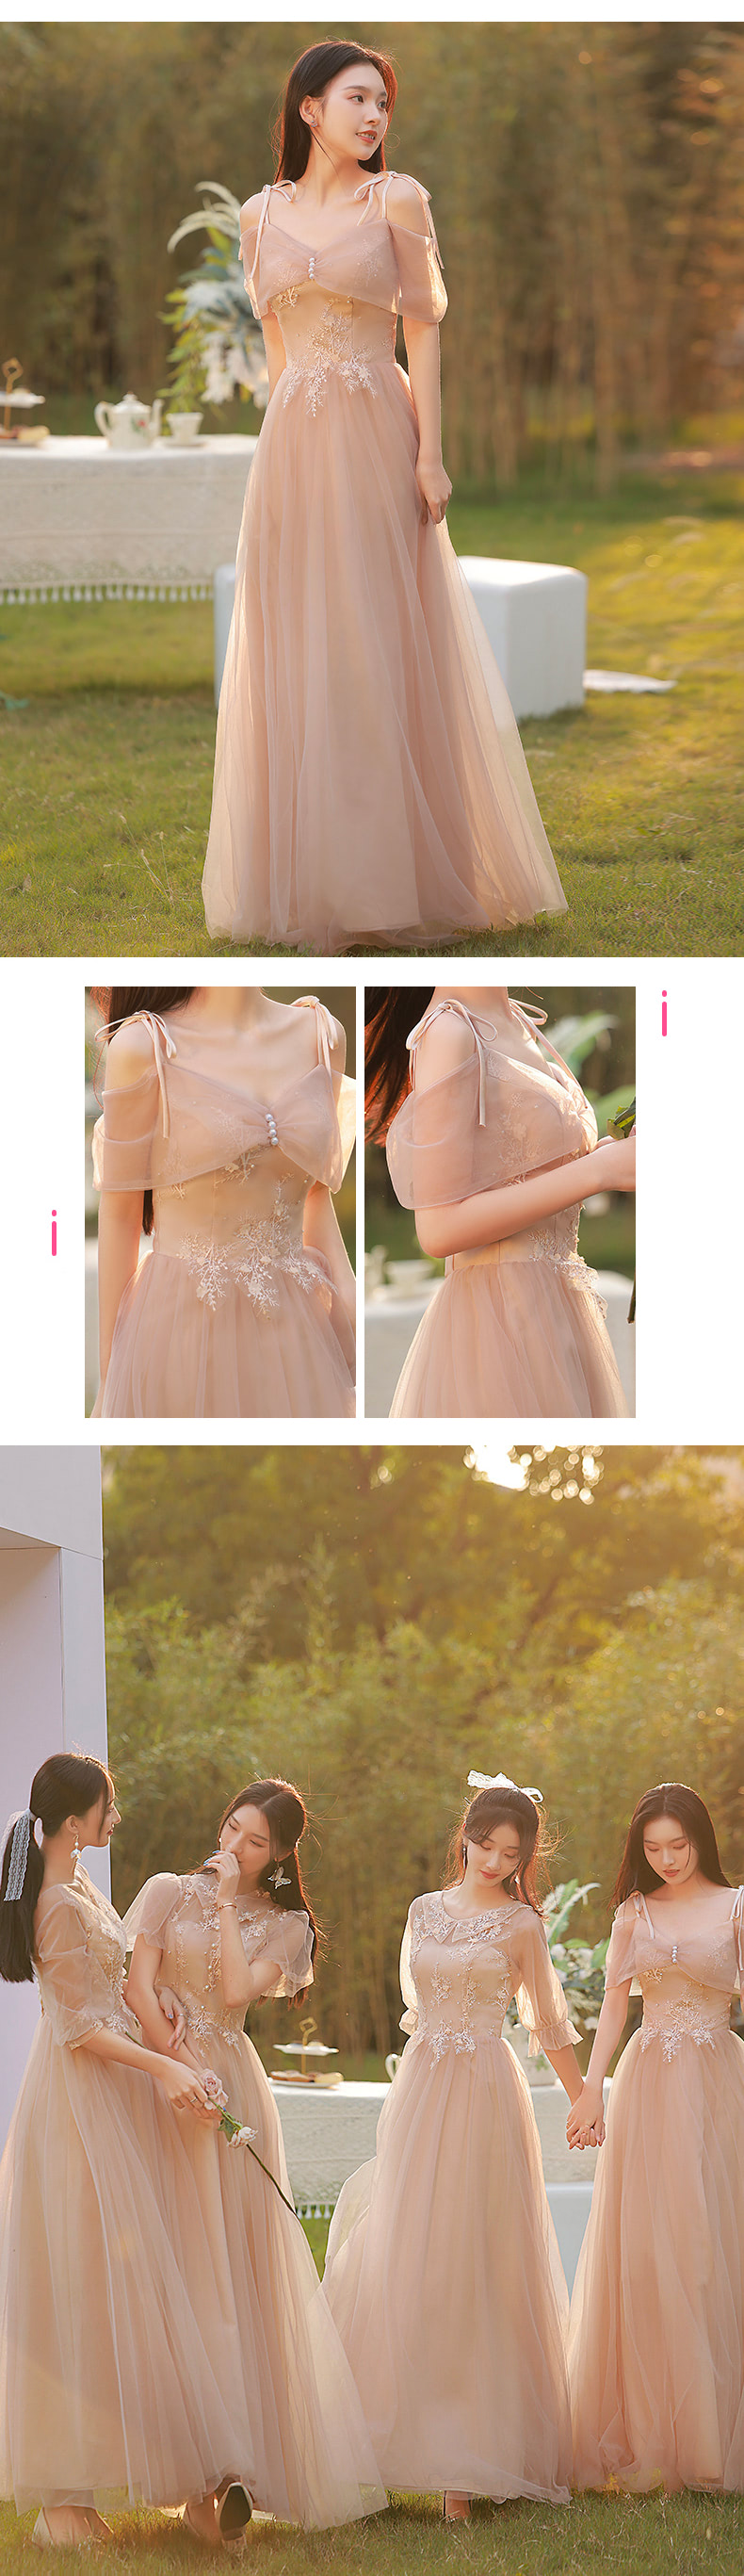 A-Line-Champagne-Wedding-Guest-Bridesmaid-Dress-Casual-Gown19.jpg